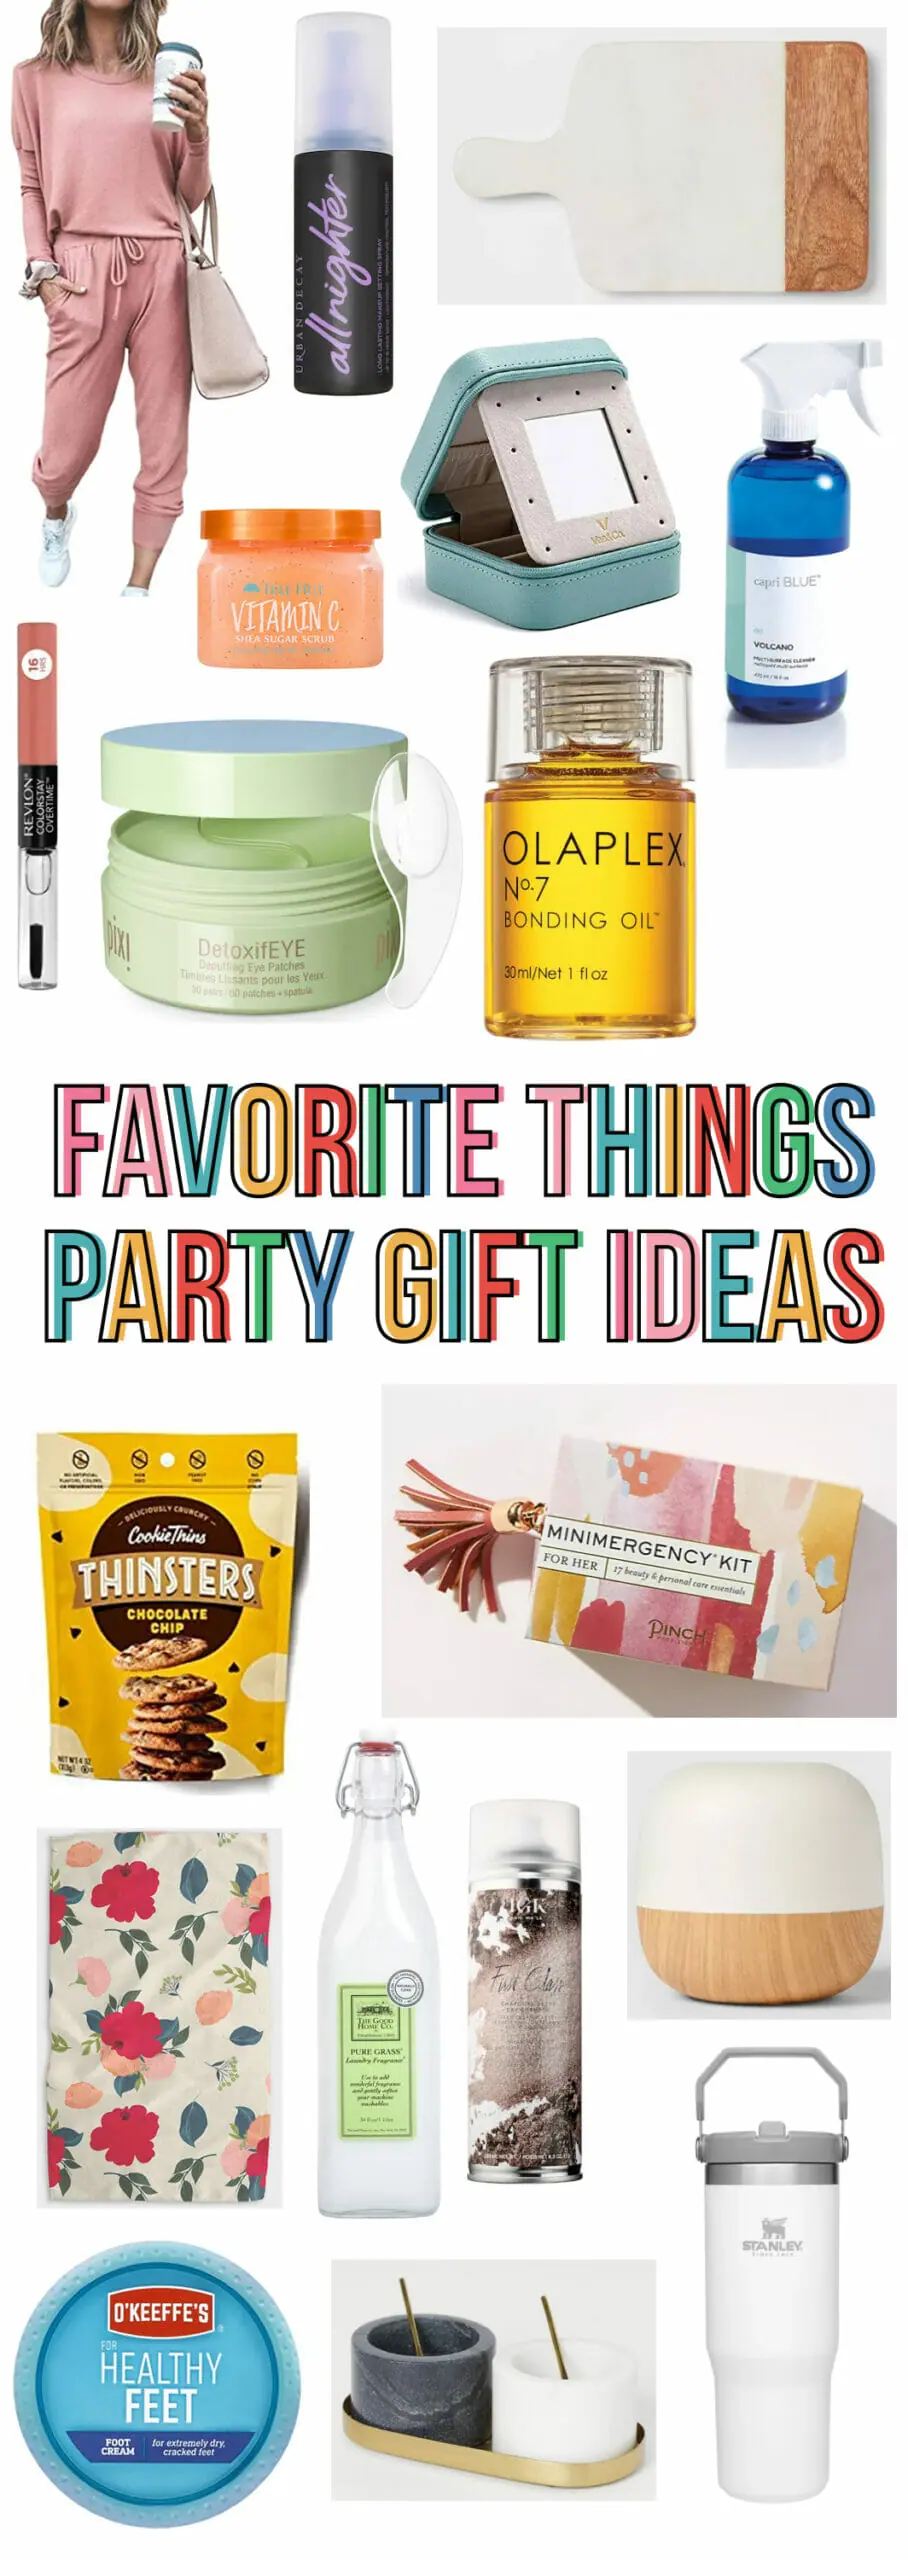 Huge list of images for Favorite Things gift ideas.